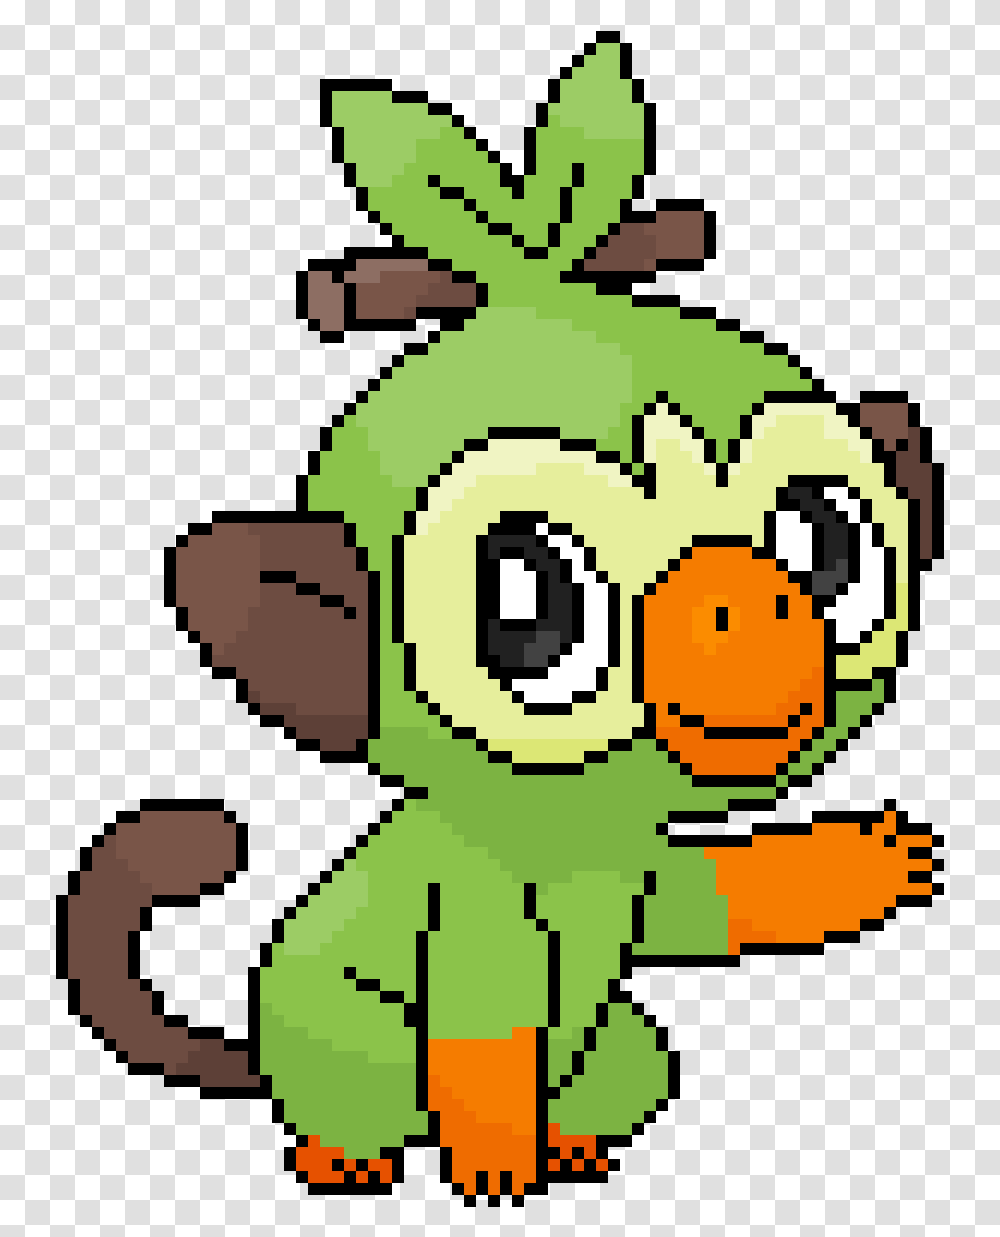 Angry Pikachu Grookey Pokemon Shield And Sword Pokemon Starters Sword And Shield Leak, Graphics, Cross, Symbol, Elf Transparent Png